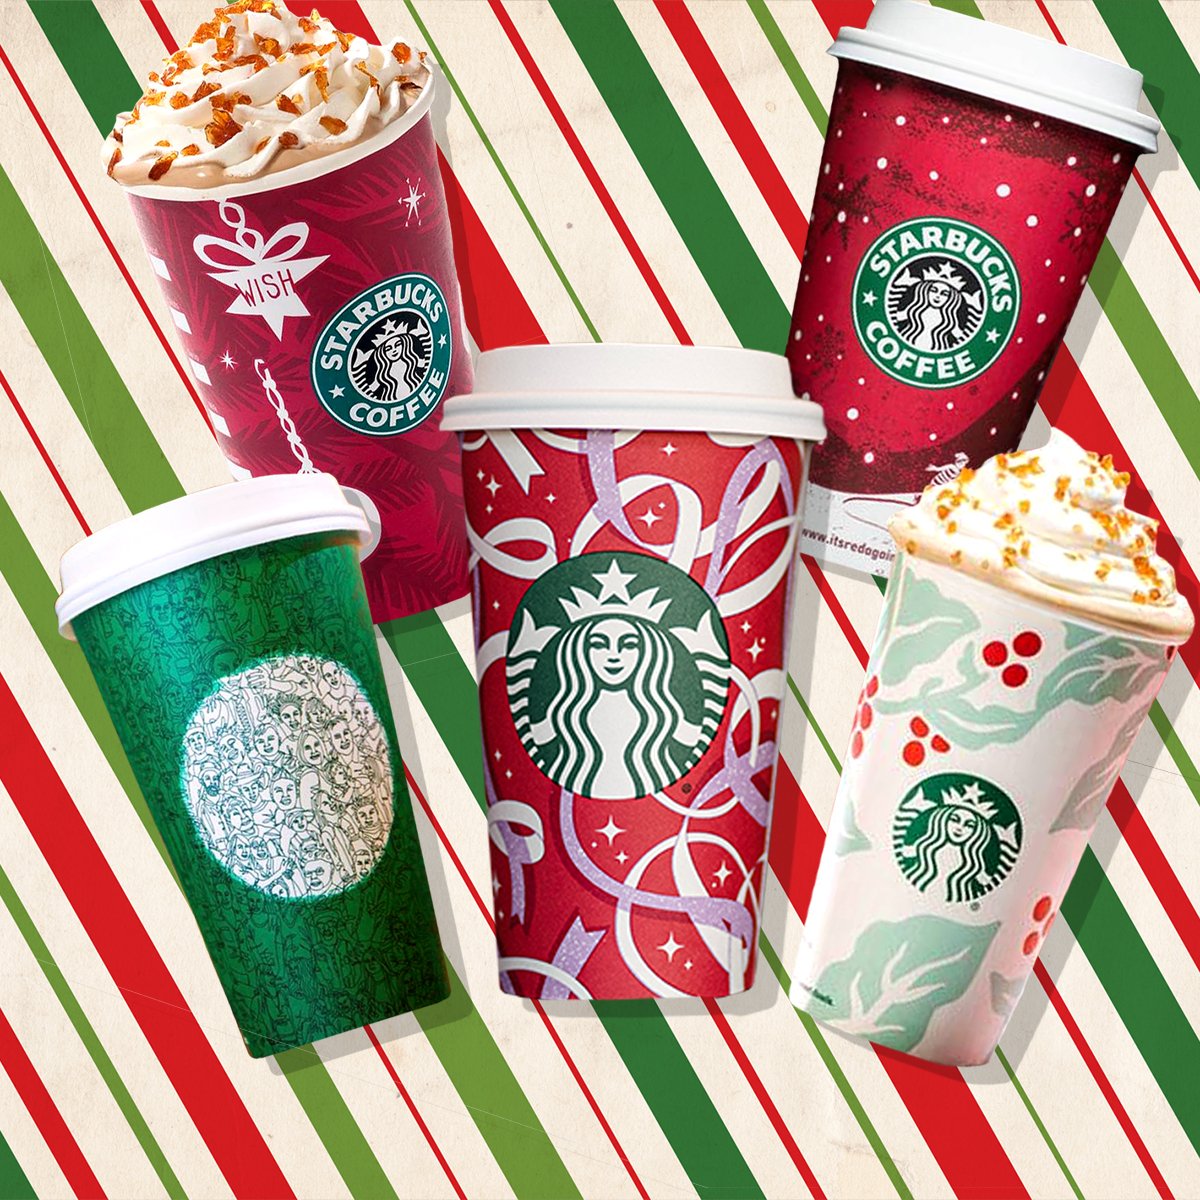 https://akns-images.eonline.com/eol_images/Entire_Site/2021103/rs_1200x1200-211103095413-1200-Starbucks-red-cups.jpg?fit=around%7C1080:540&output-quality=90&crop=1080:540;center,top